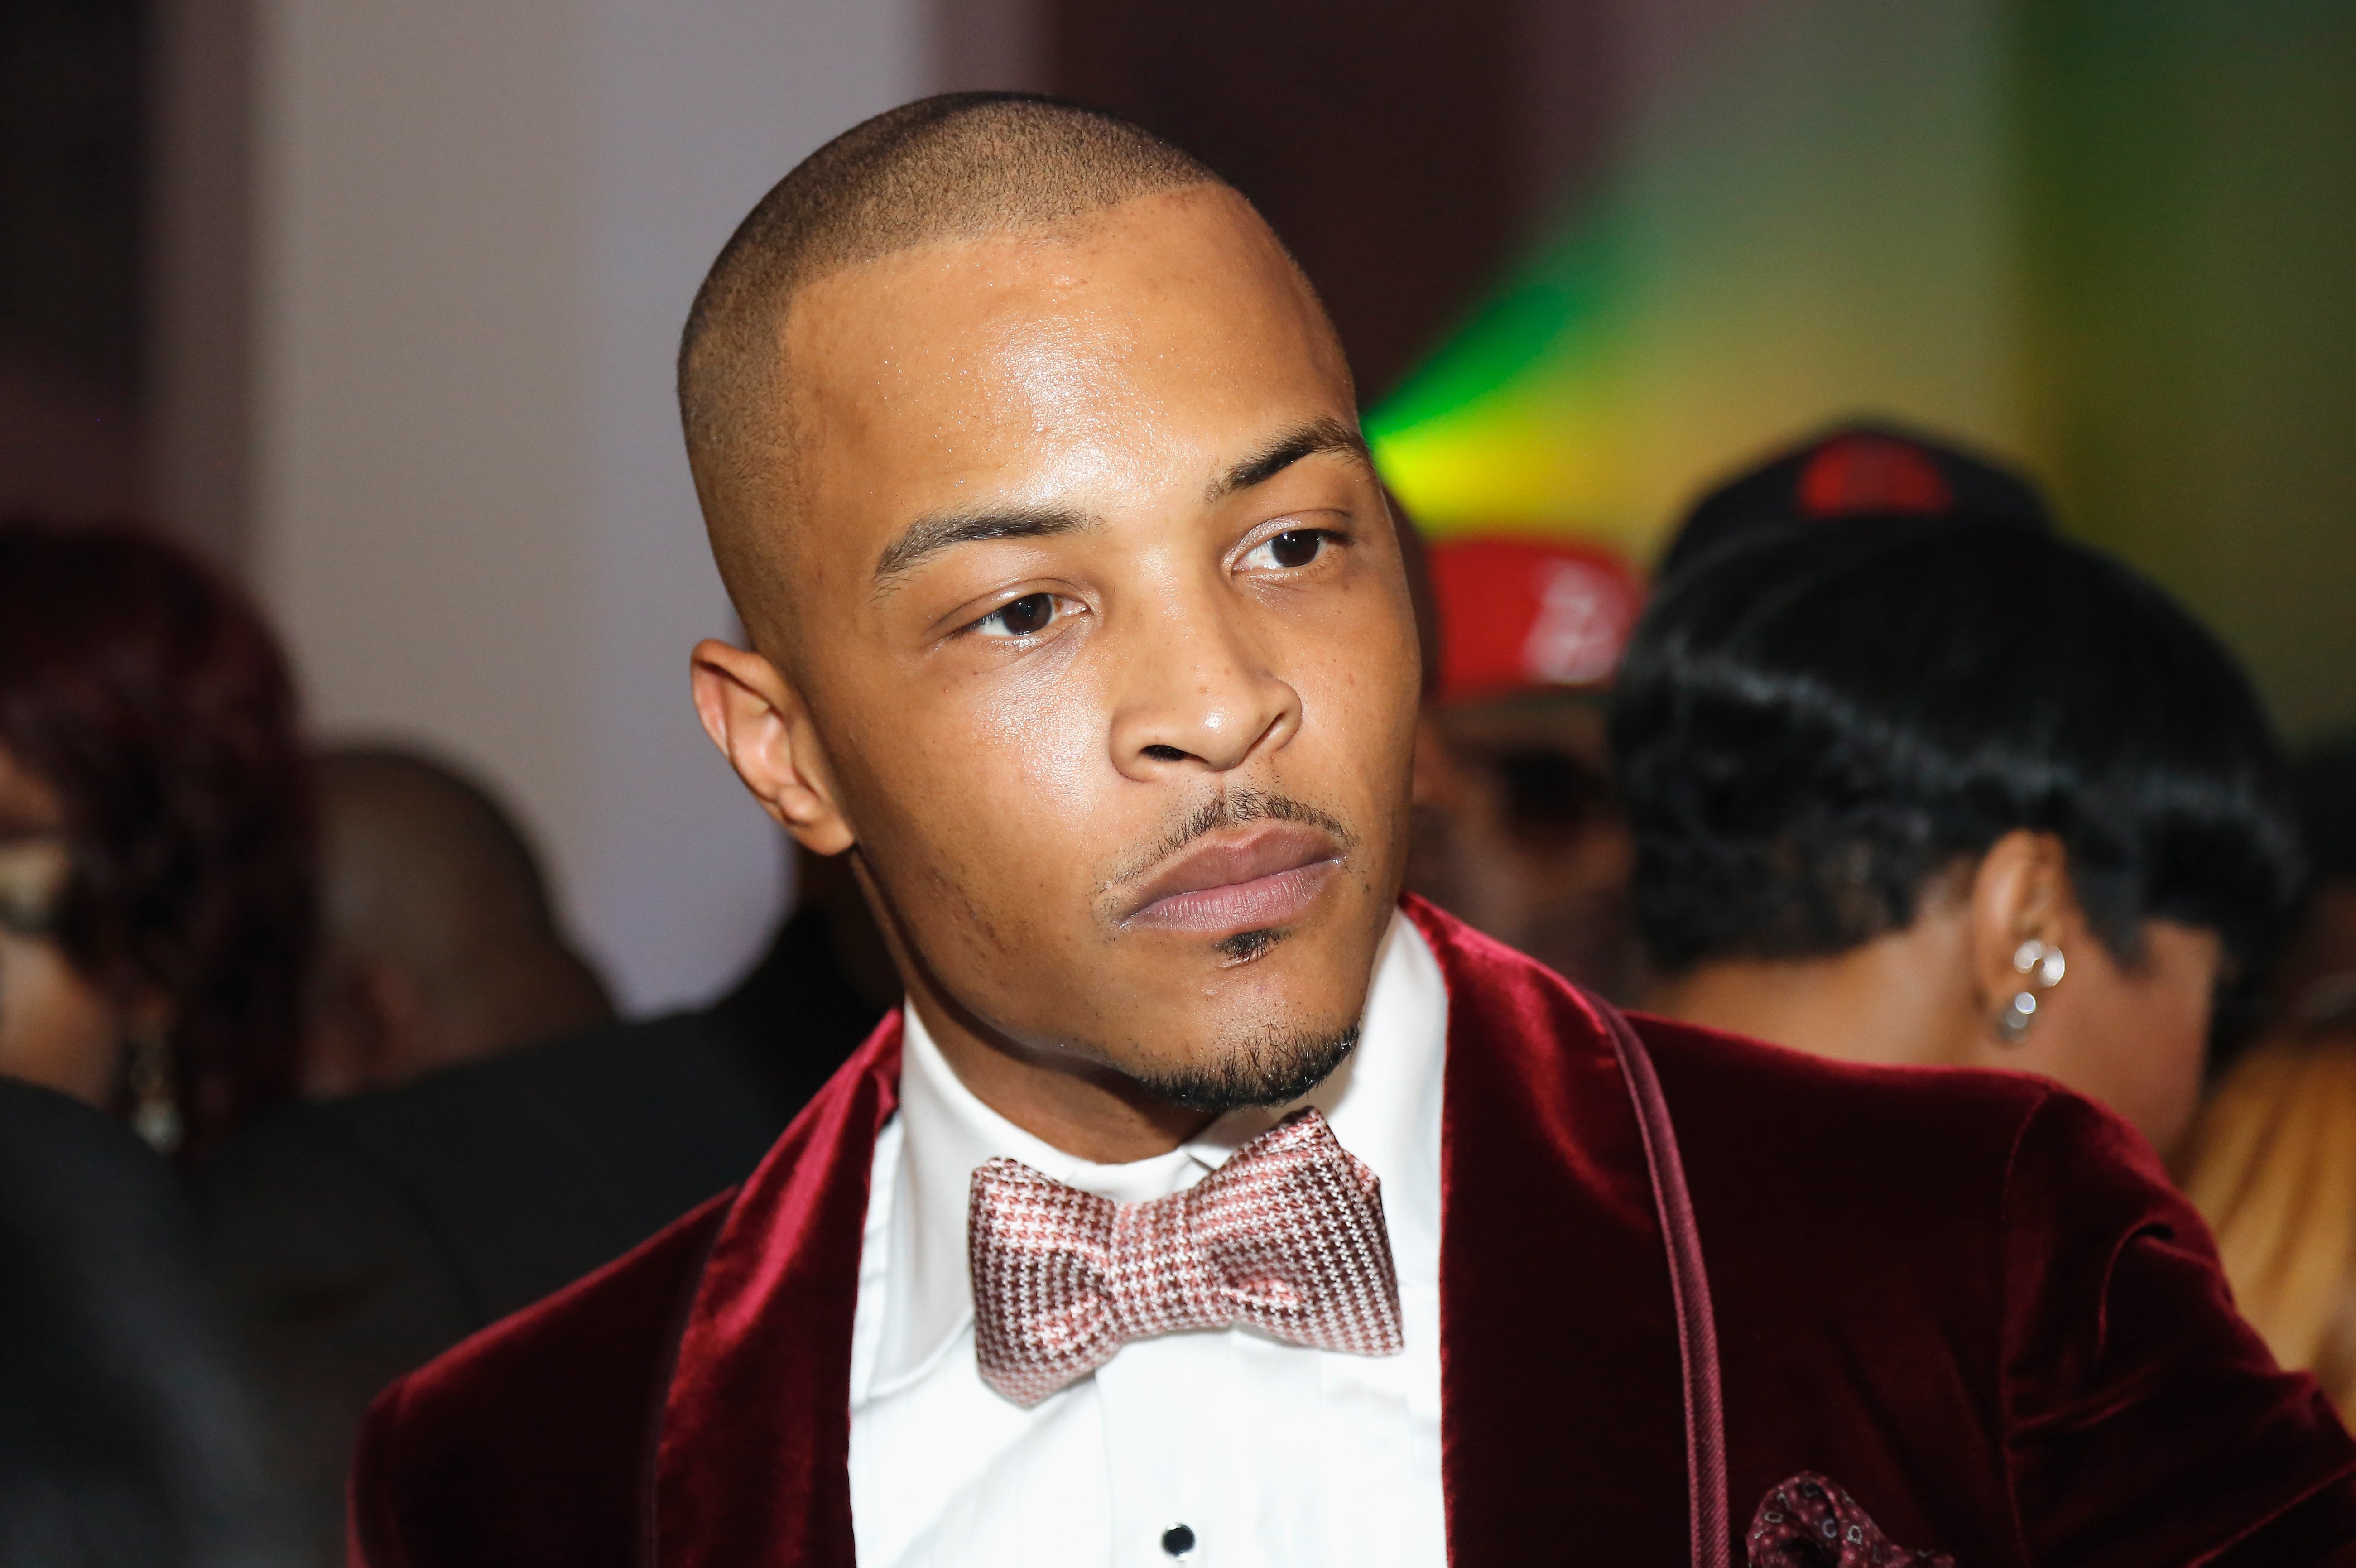 T.I. during a celebration of his birthday in September 2013. | Photo: Getty Images